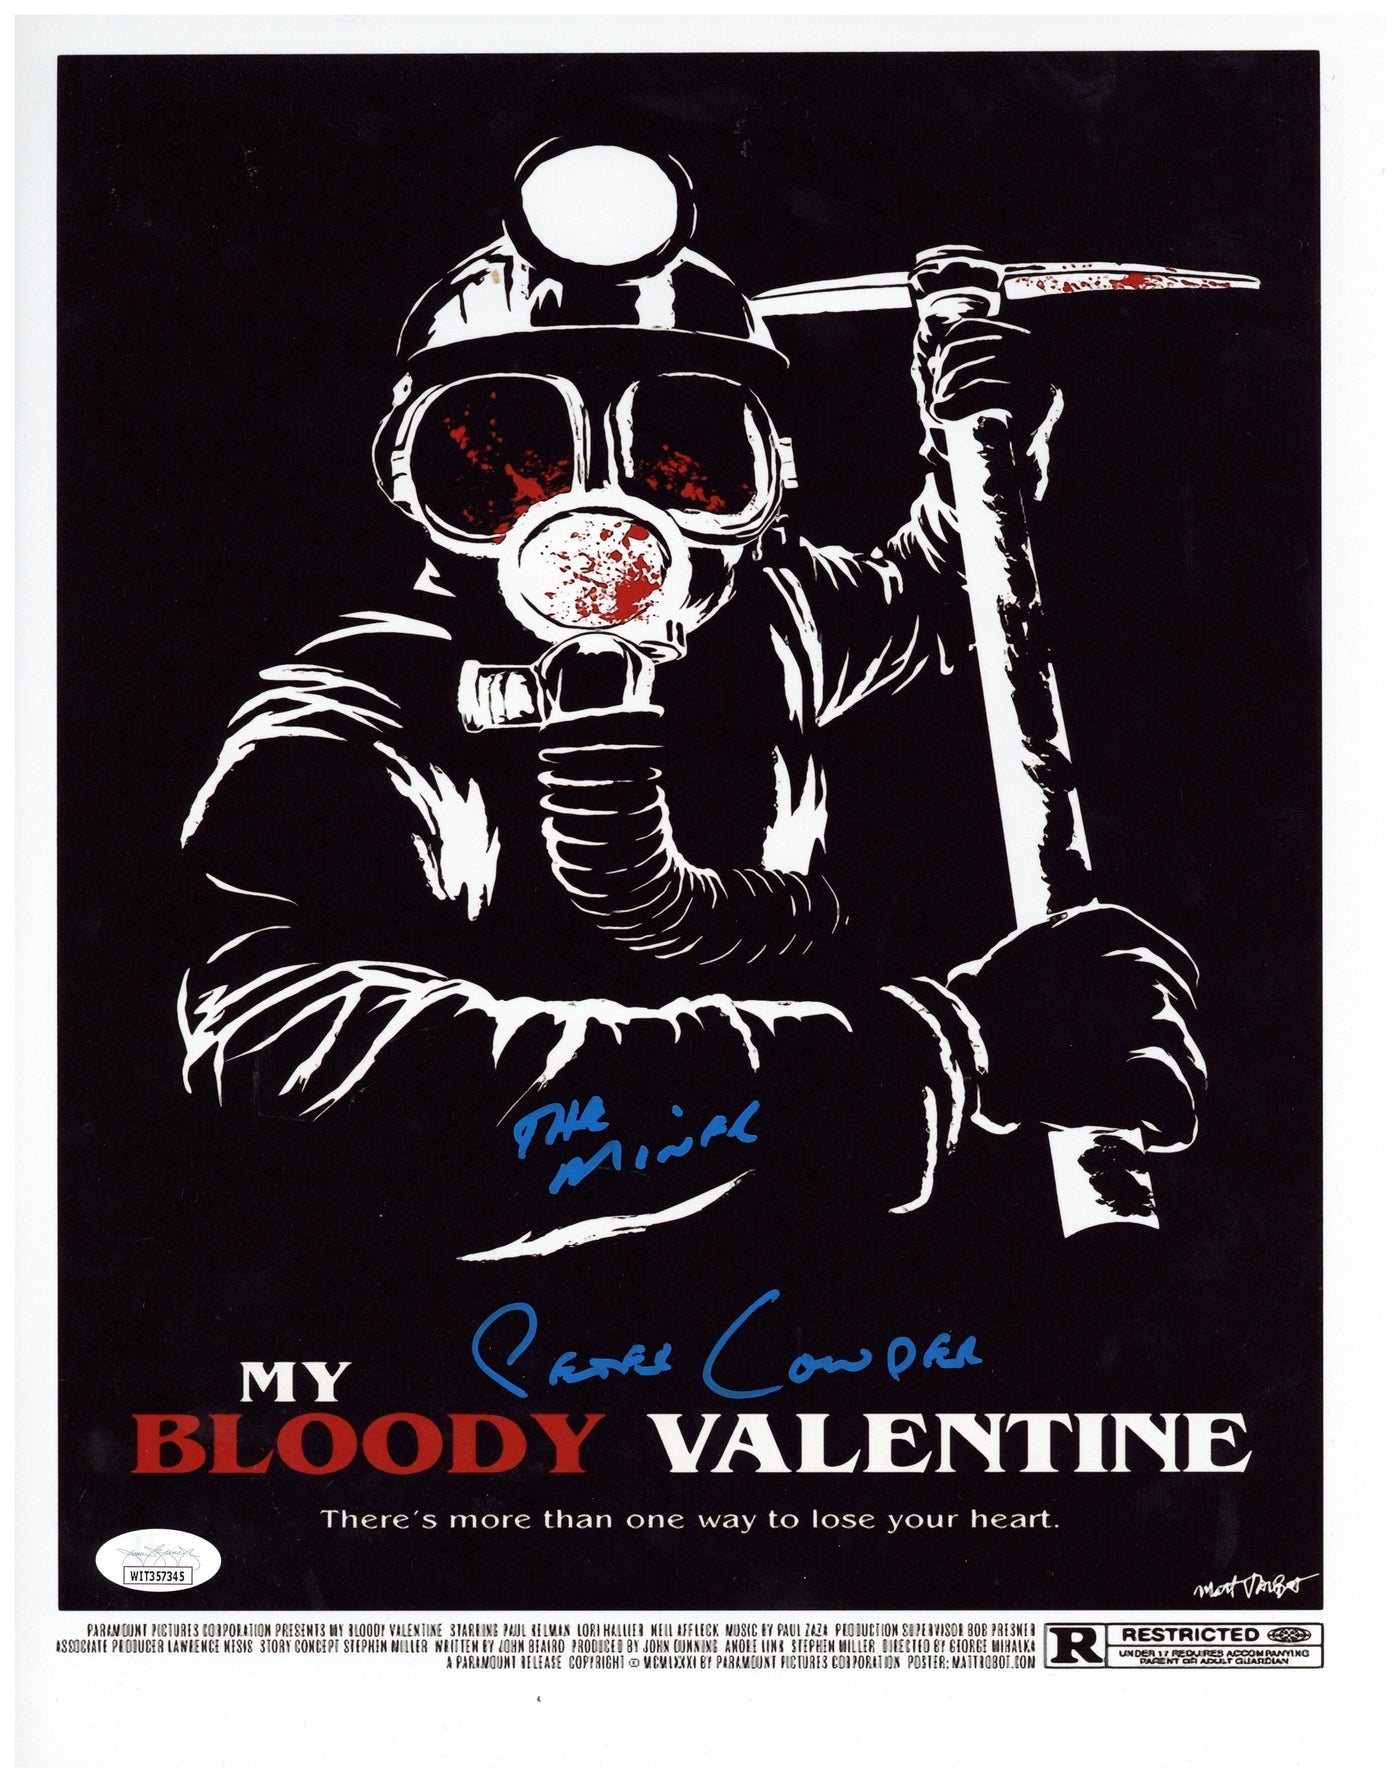 PETER COWPER SIGNED 11x14 PHOTO MY BLOODY VALENTINE THE MINER AUTOGRAPHED JSA COA